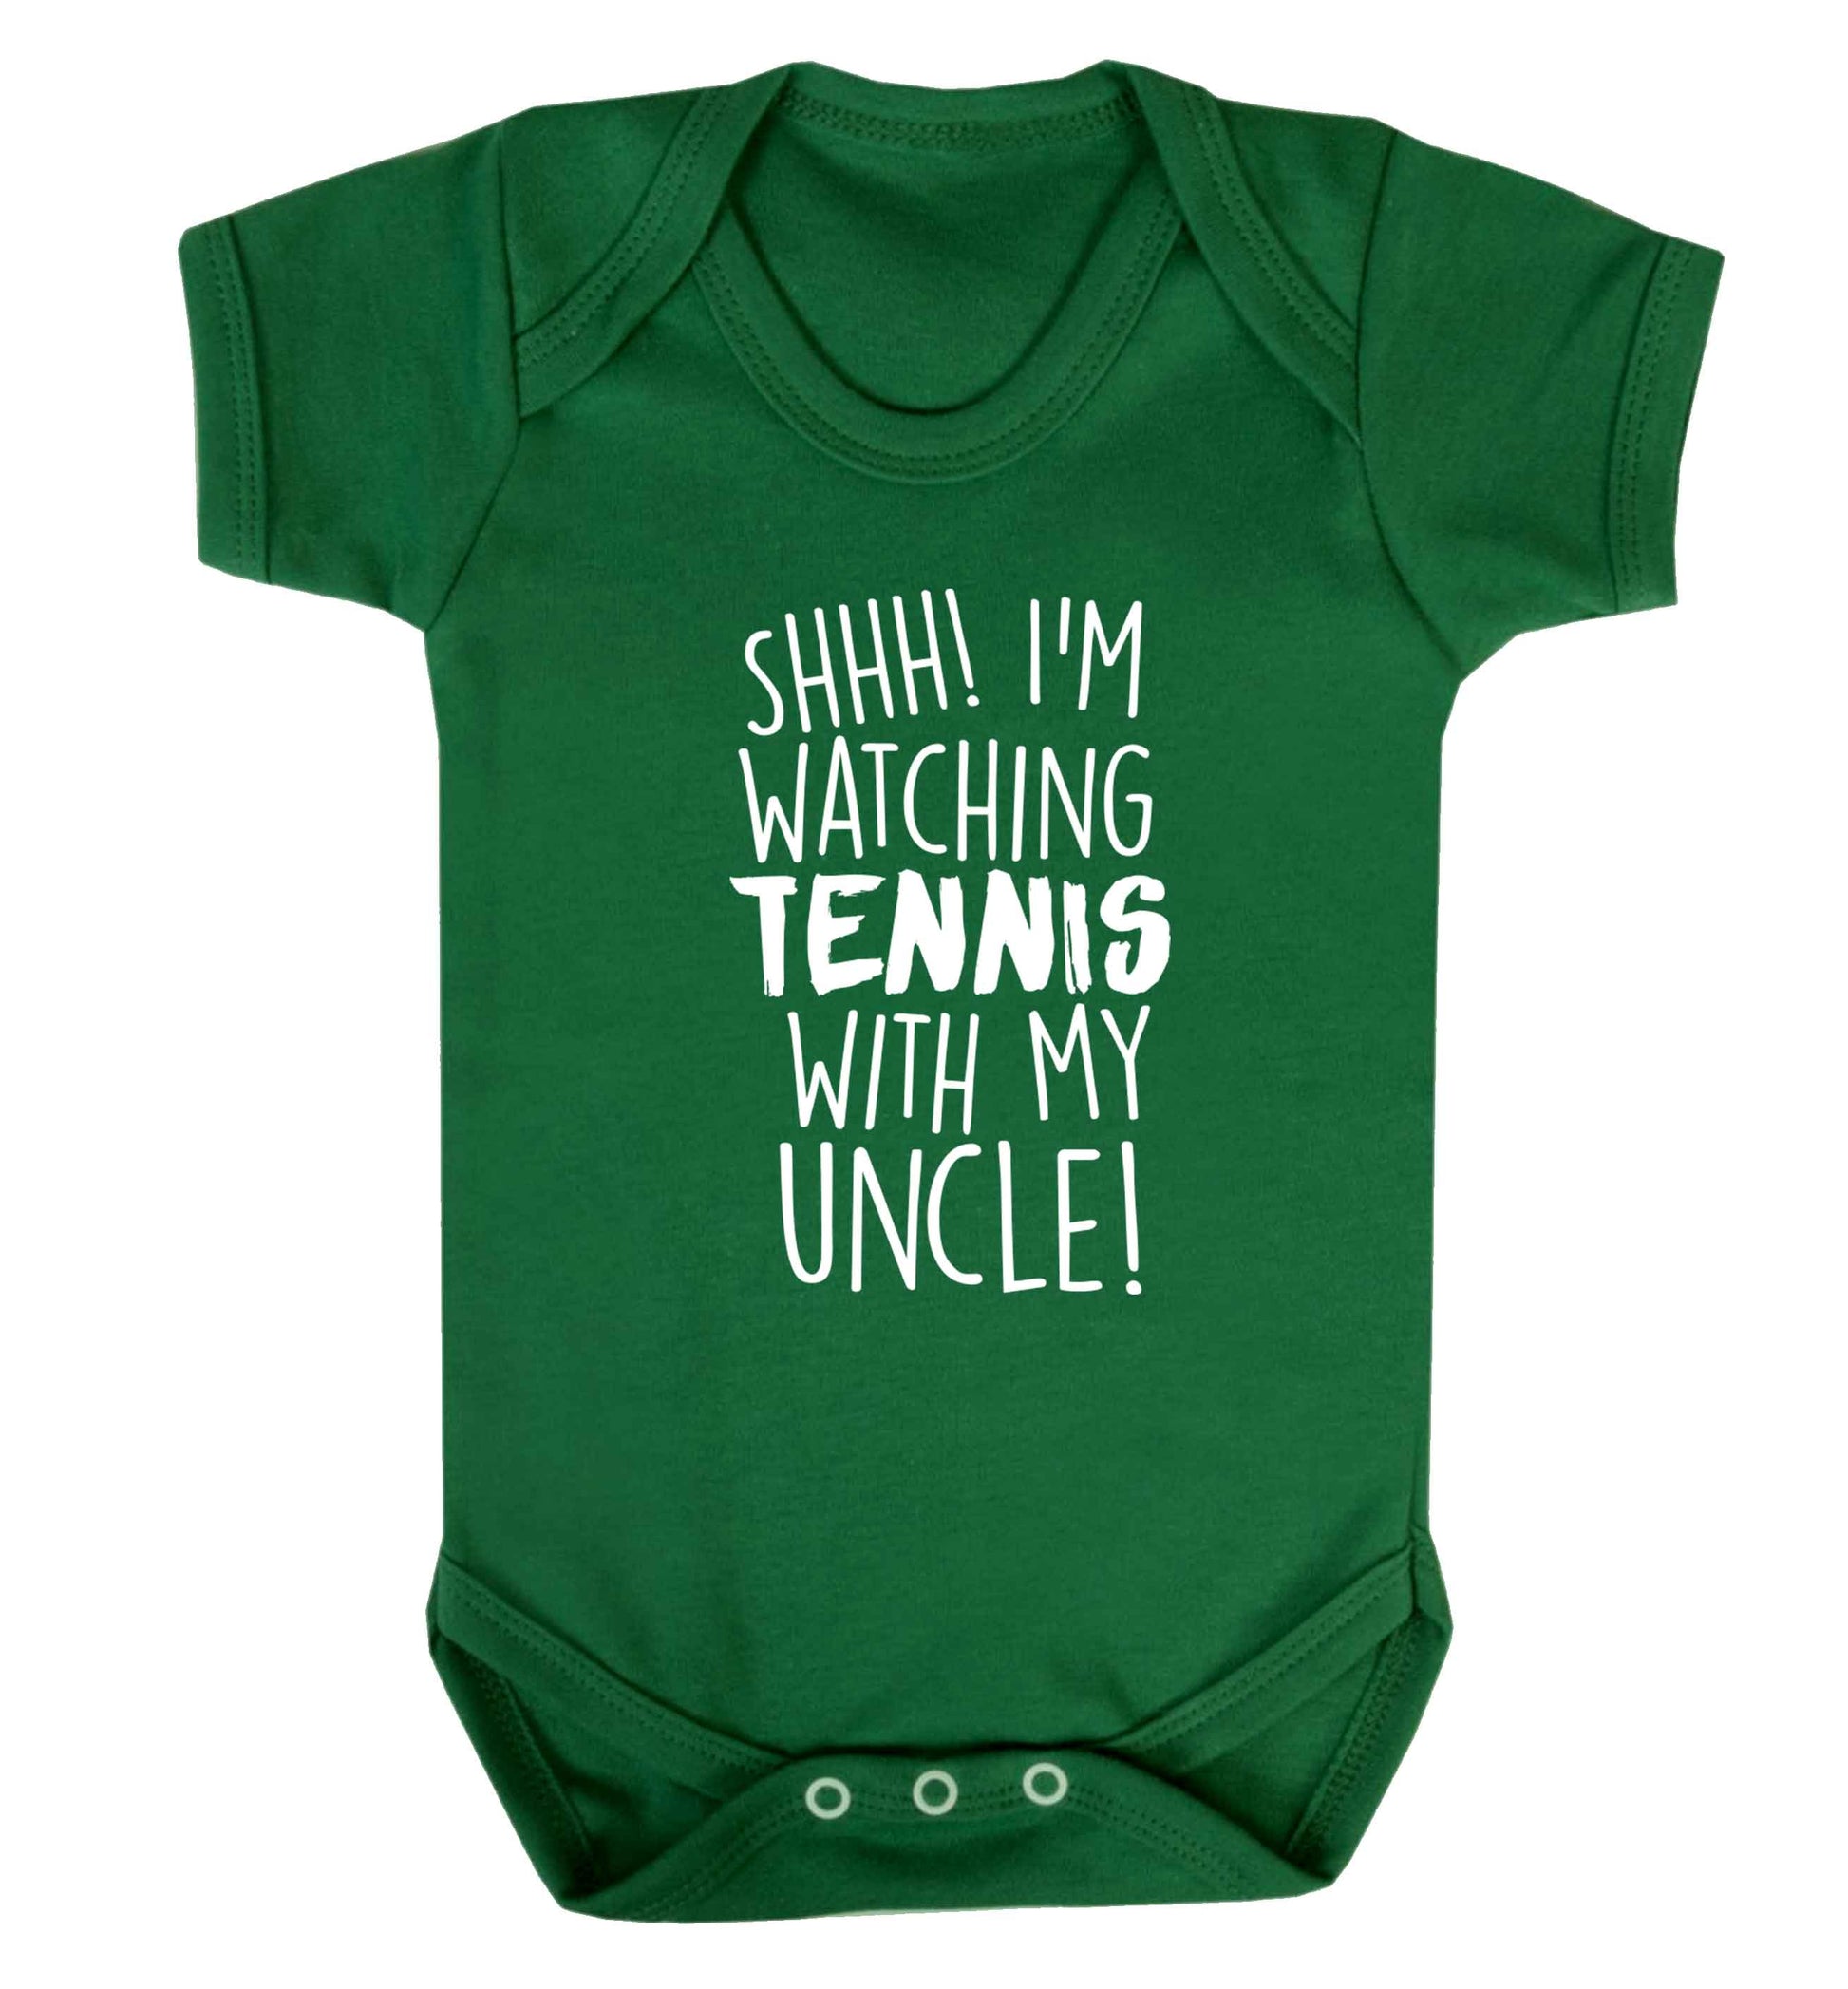 Shh! I'm watching tennis with my uncle! Baby Vest green 18-24 months